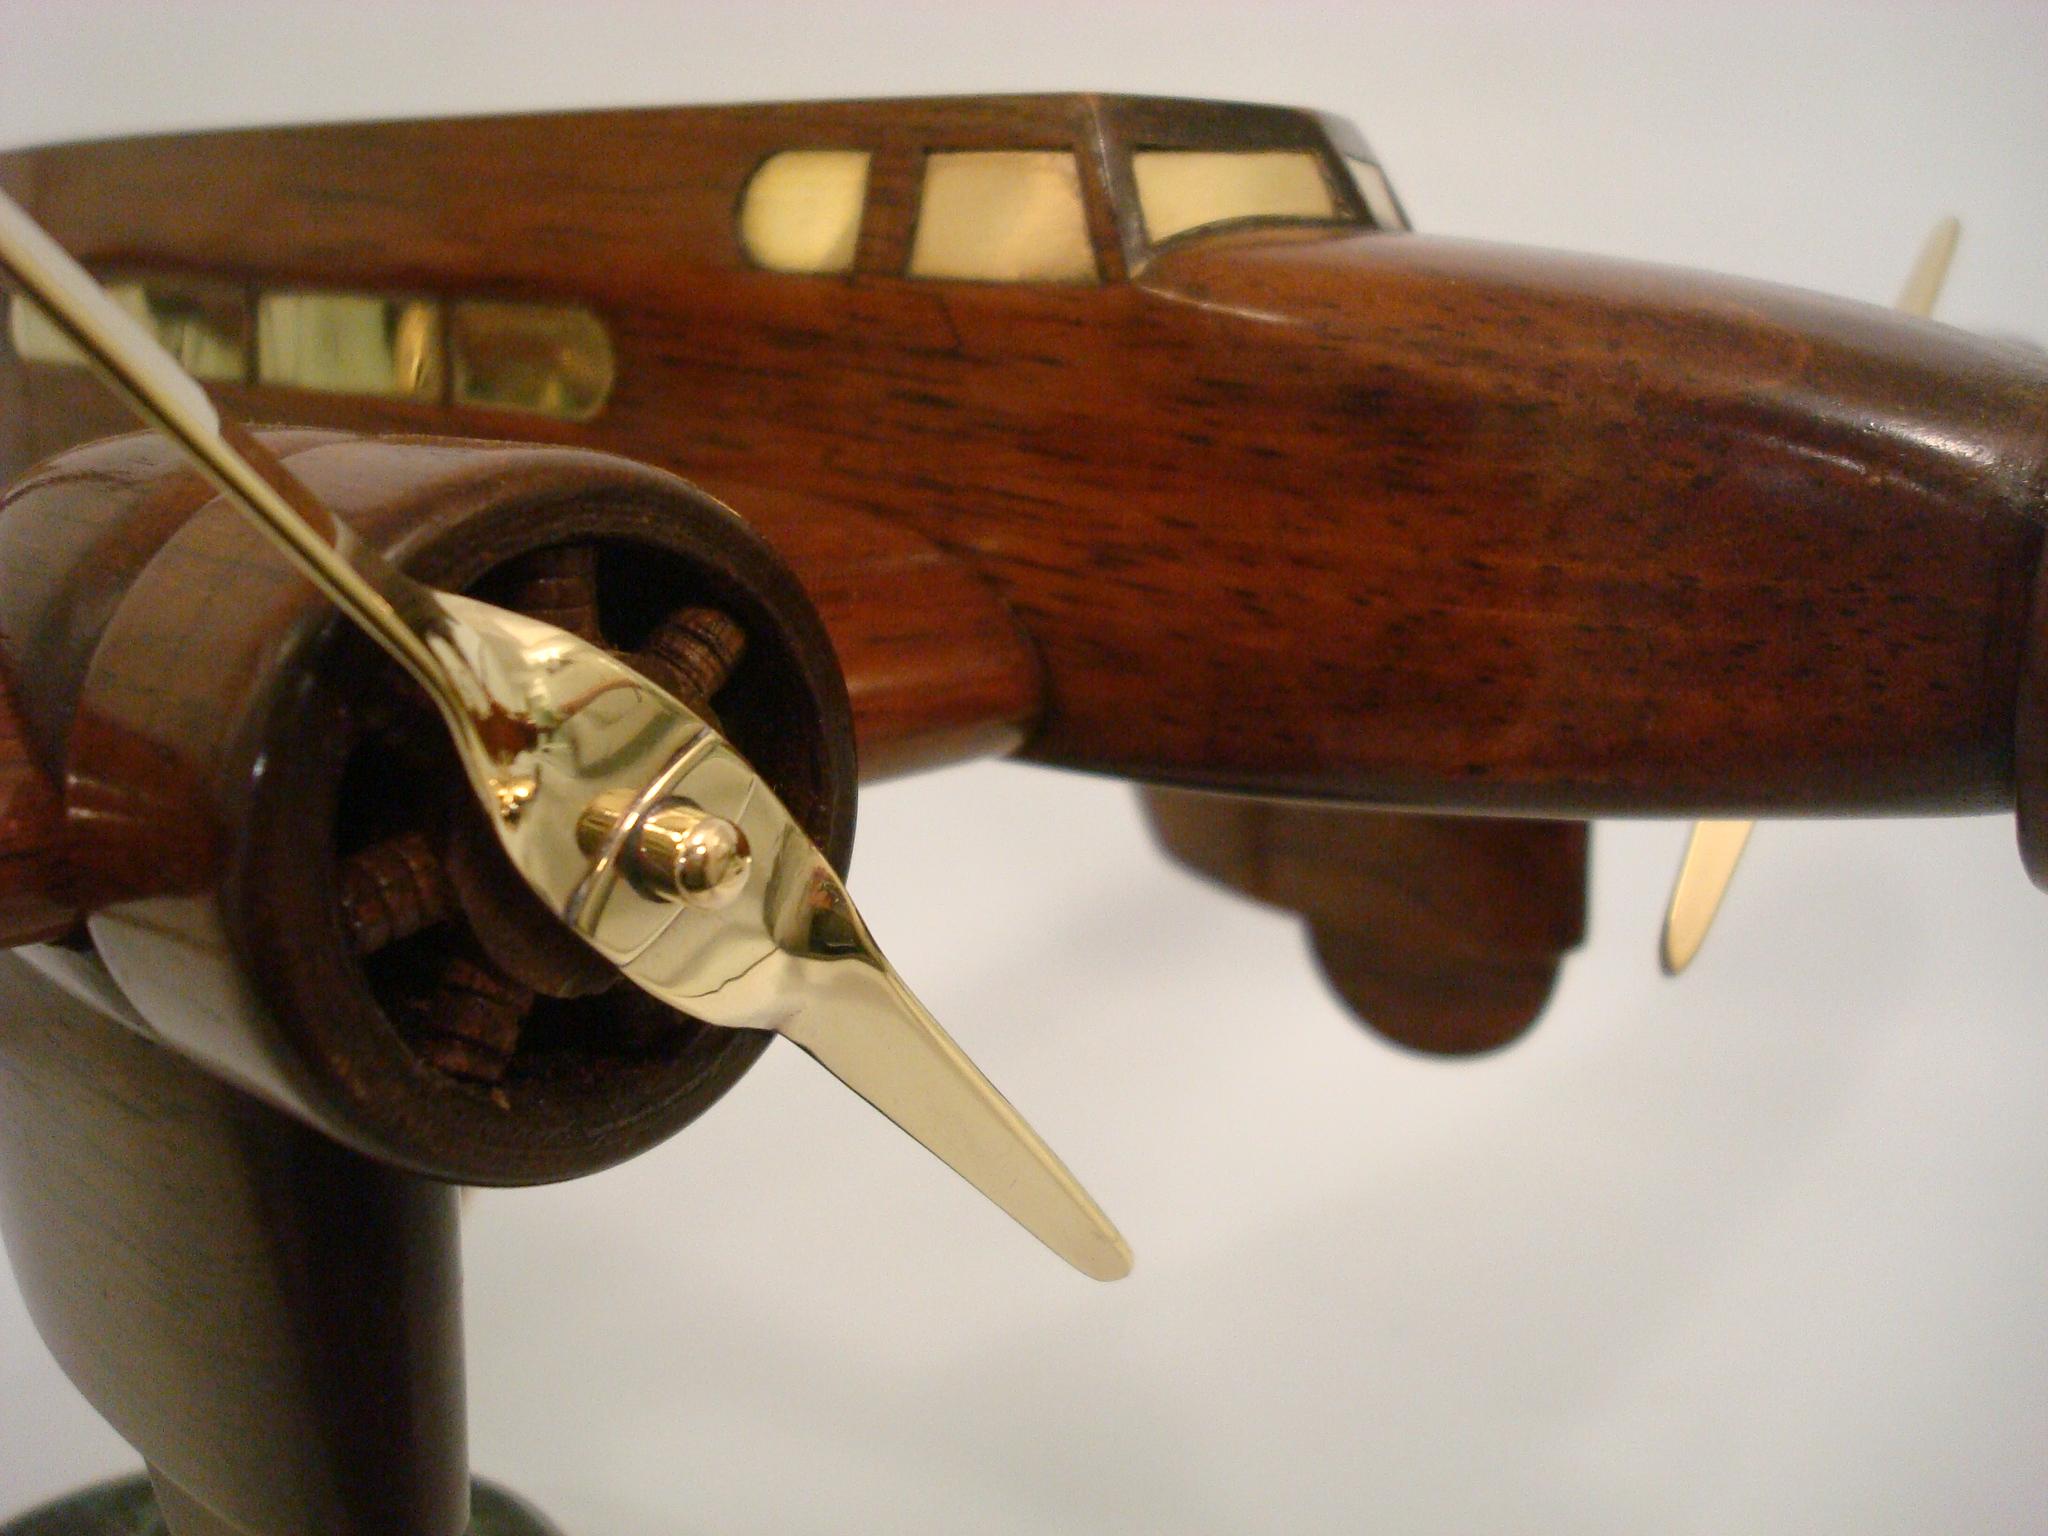 20th Century Art Deco Dewoitine Wooden Counters Desk Model Airplane 1930s French For Sale